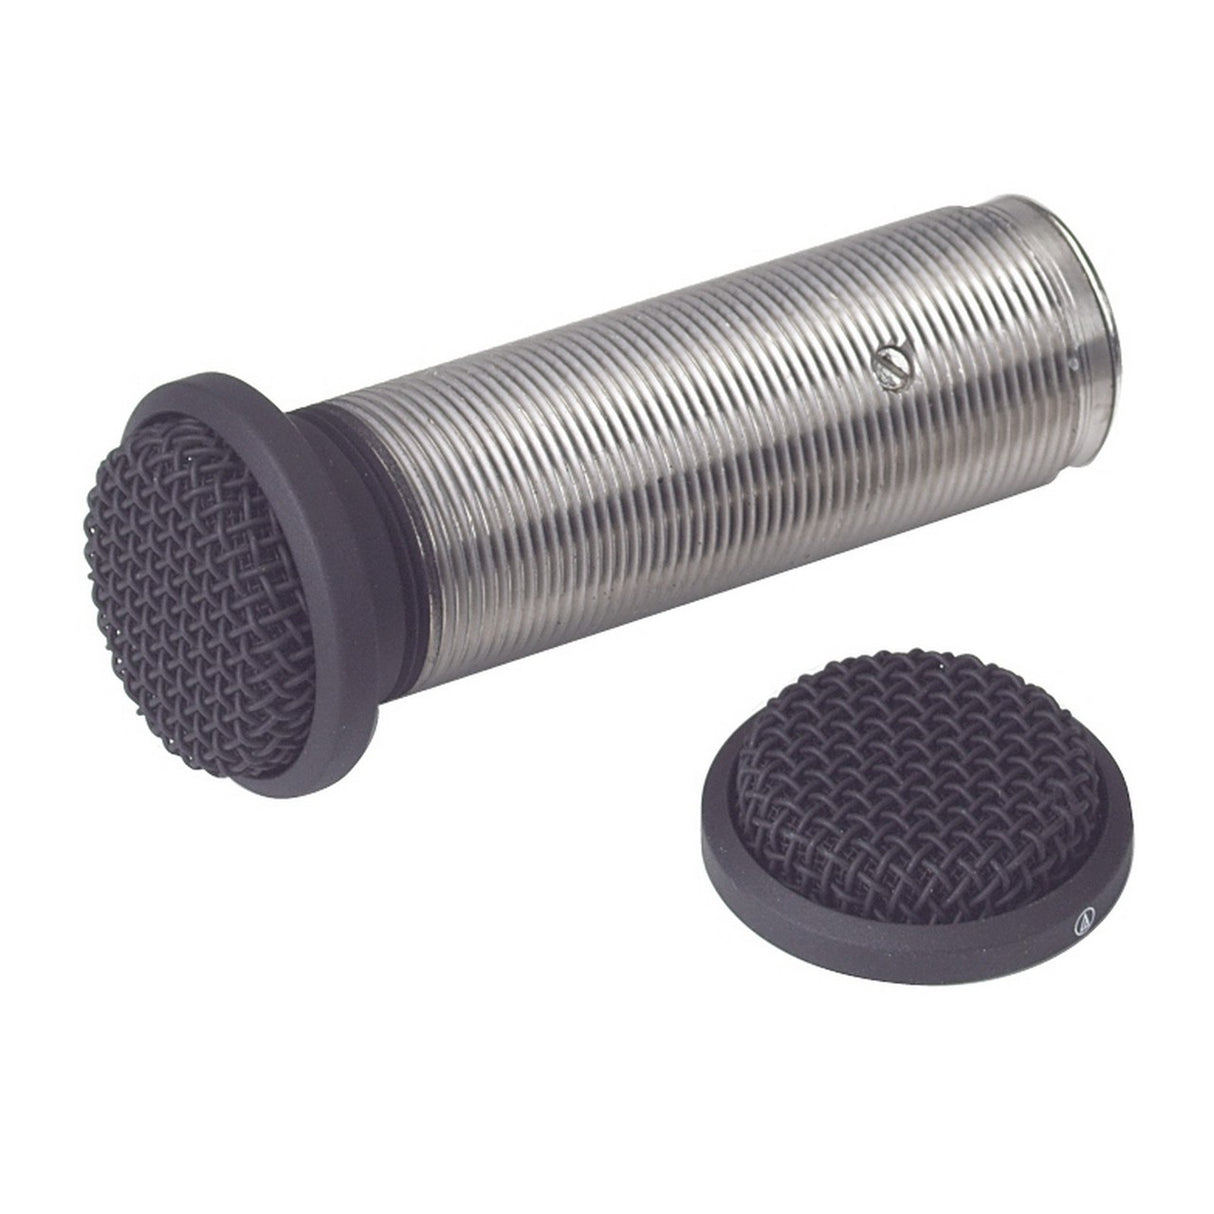 ClearOne Button Microphone | Omni-Directional Table Panel Permanent Installation Conferencing Microphone